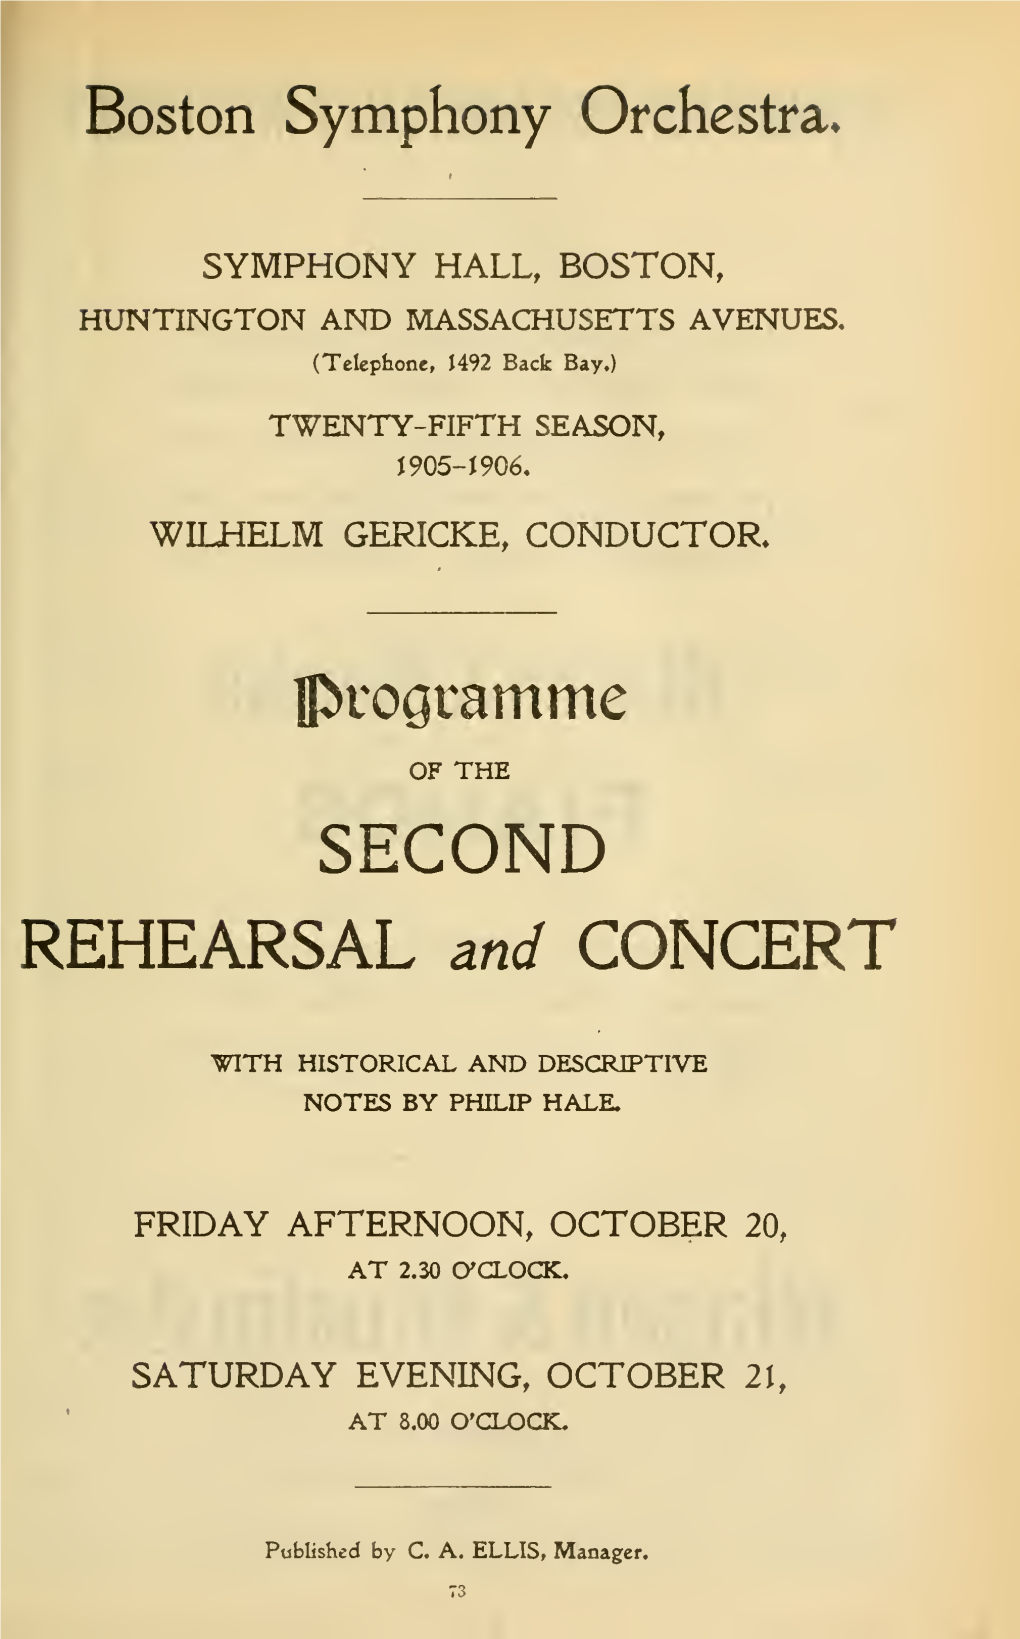 SECOND REHEARSAL and CONCERT